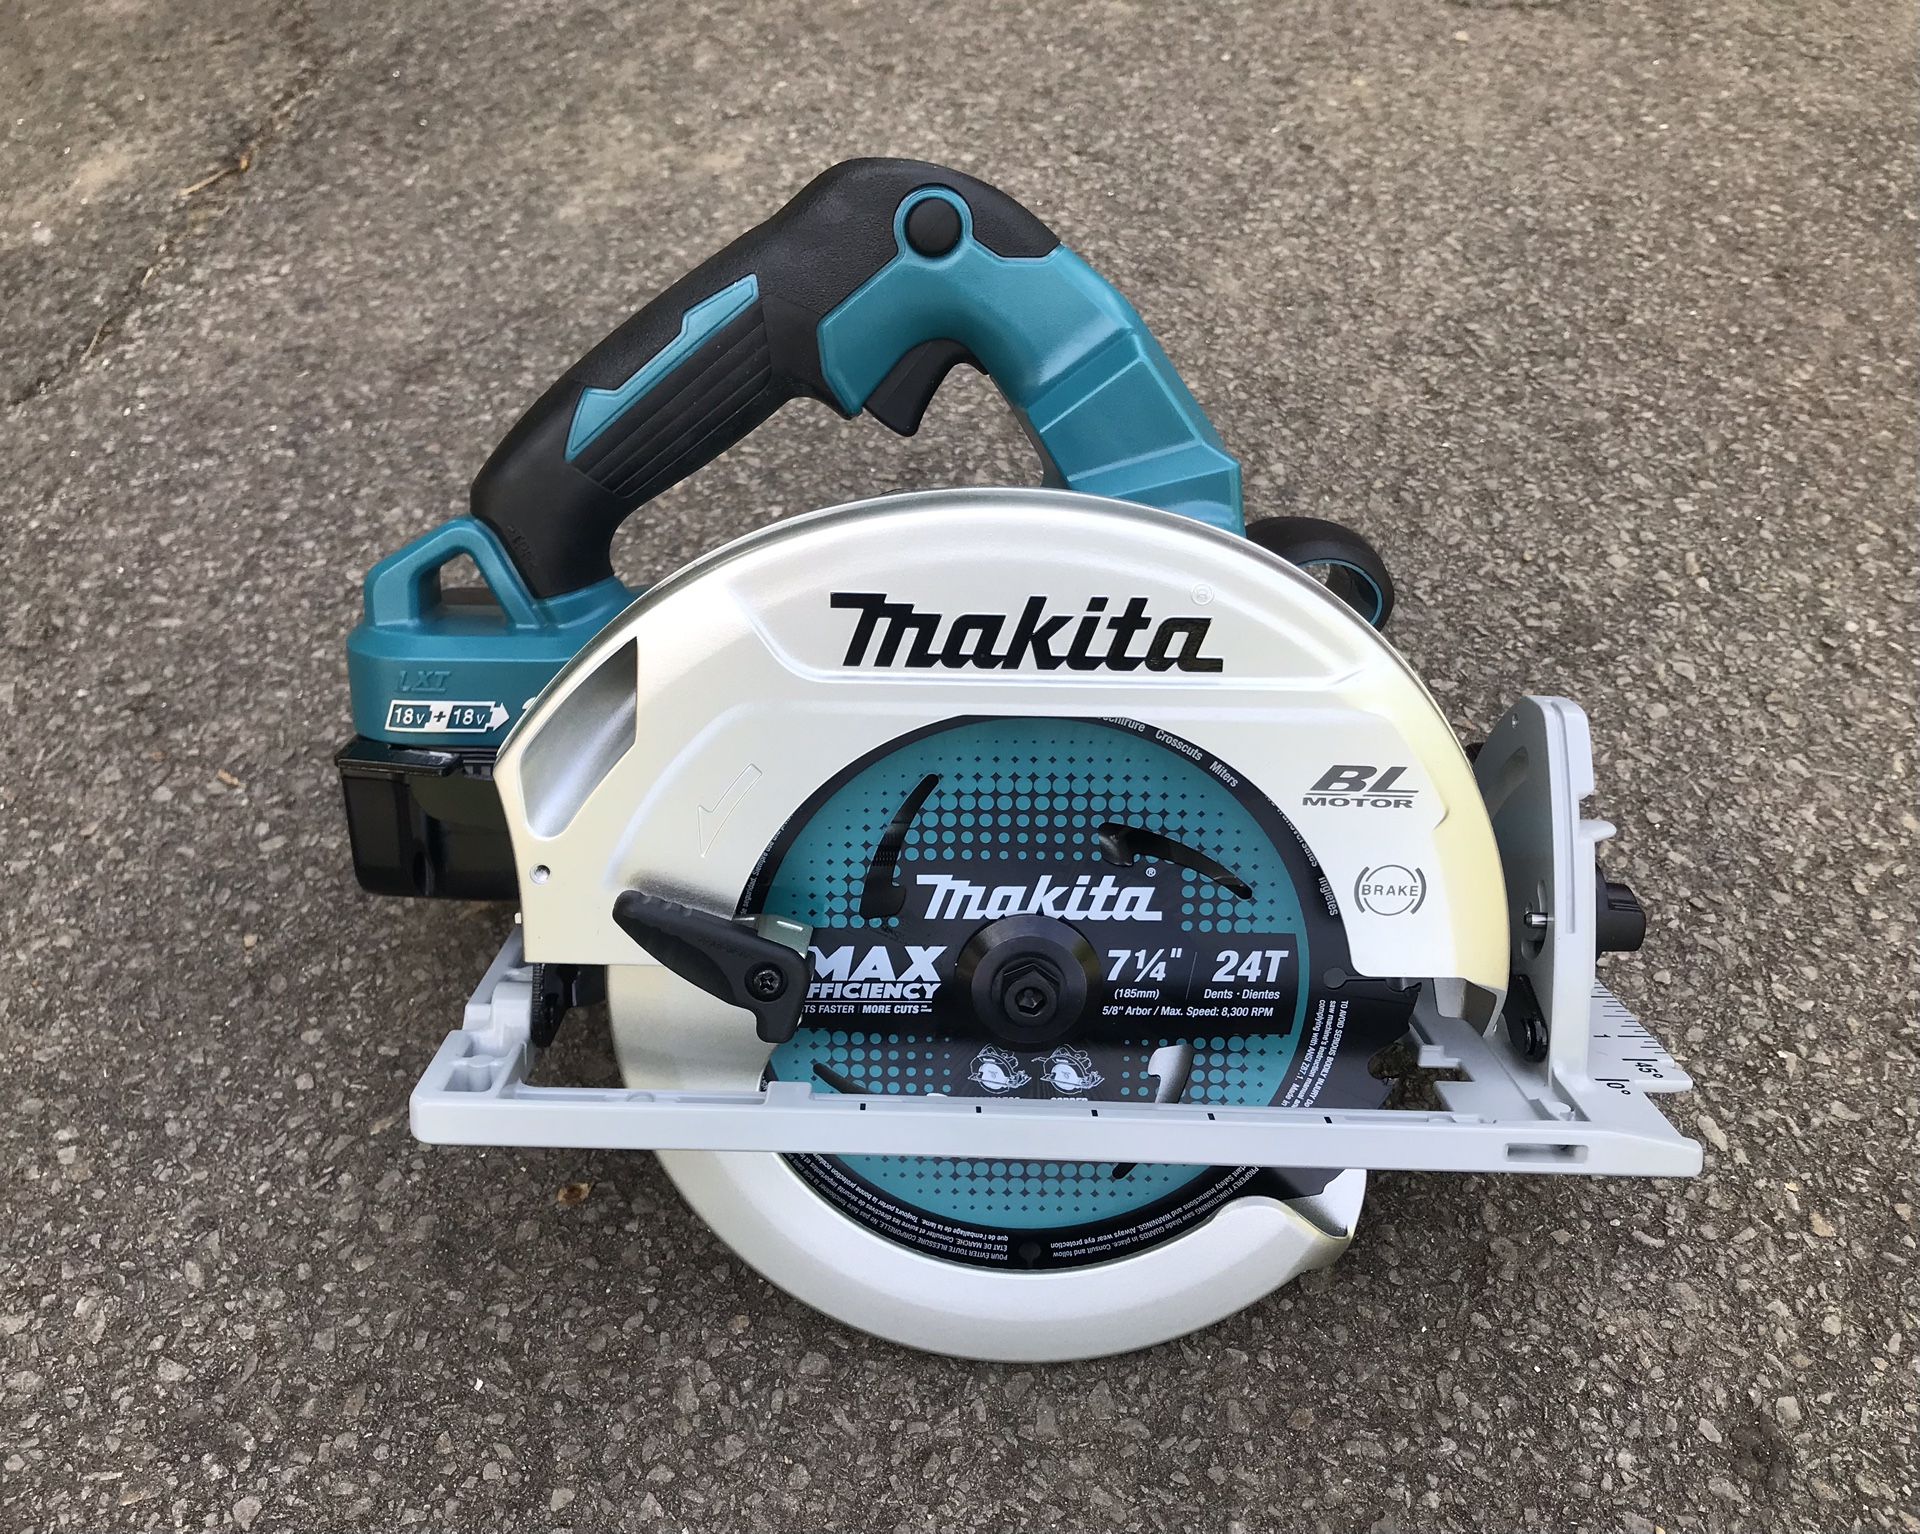 Makita LXT X2 36-volt brushless Side-winder 7-1/4” Circular Saw (tool only)